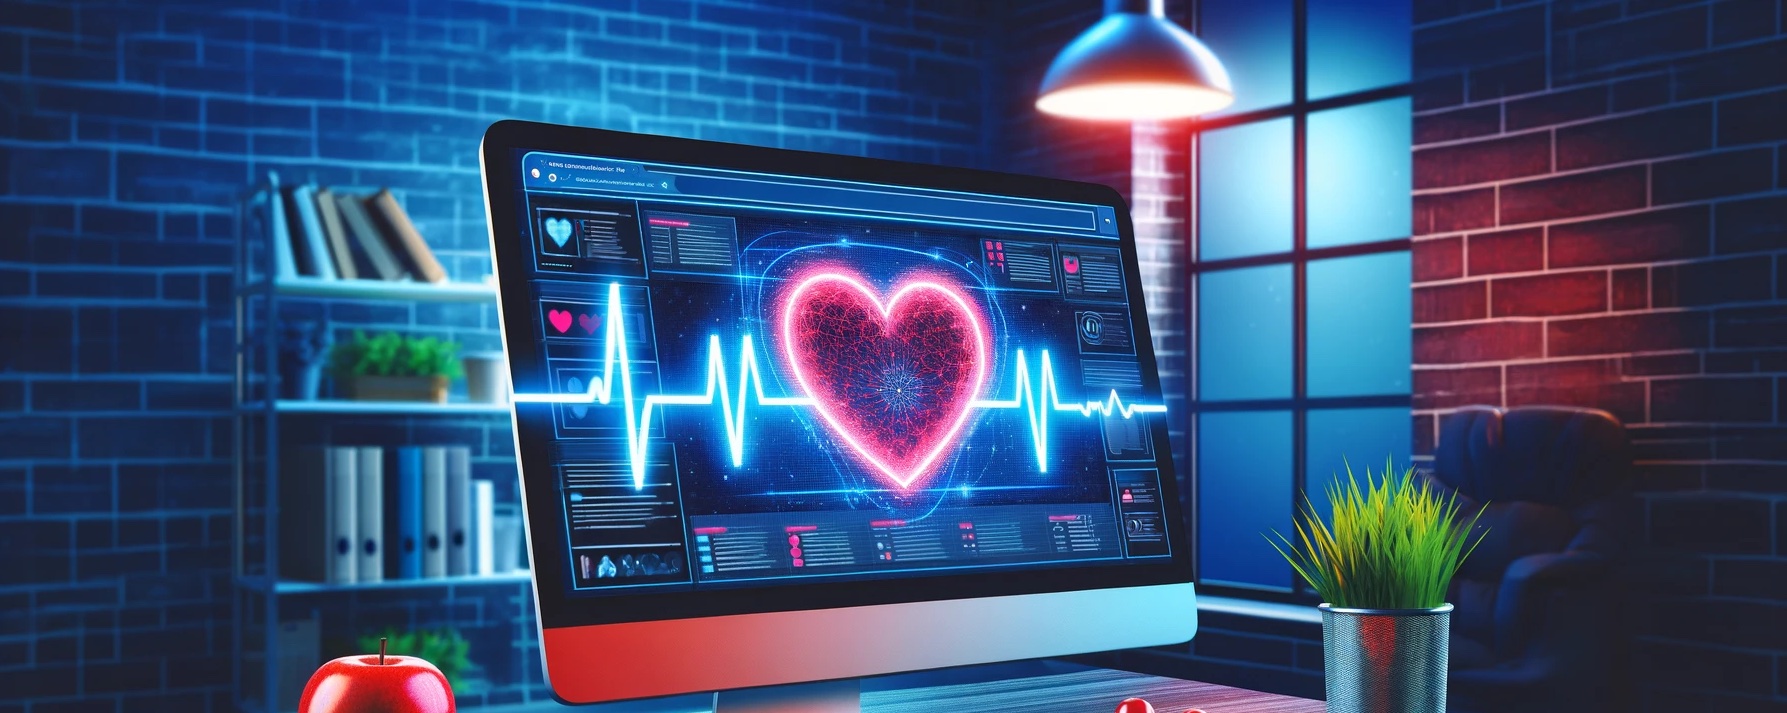 ux metrics - website health with heart and pulse on desktop monitor